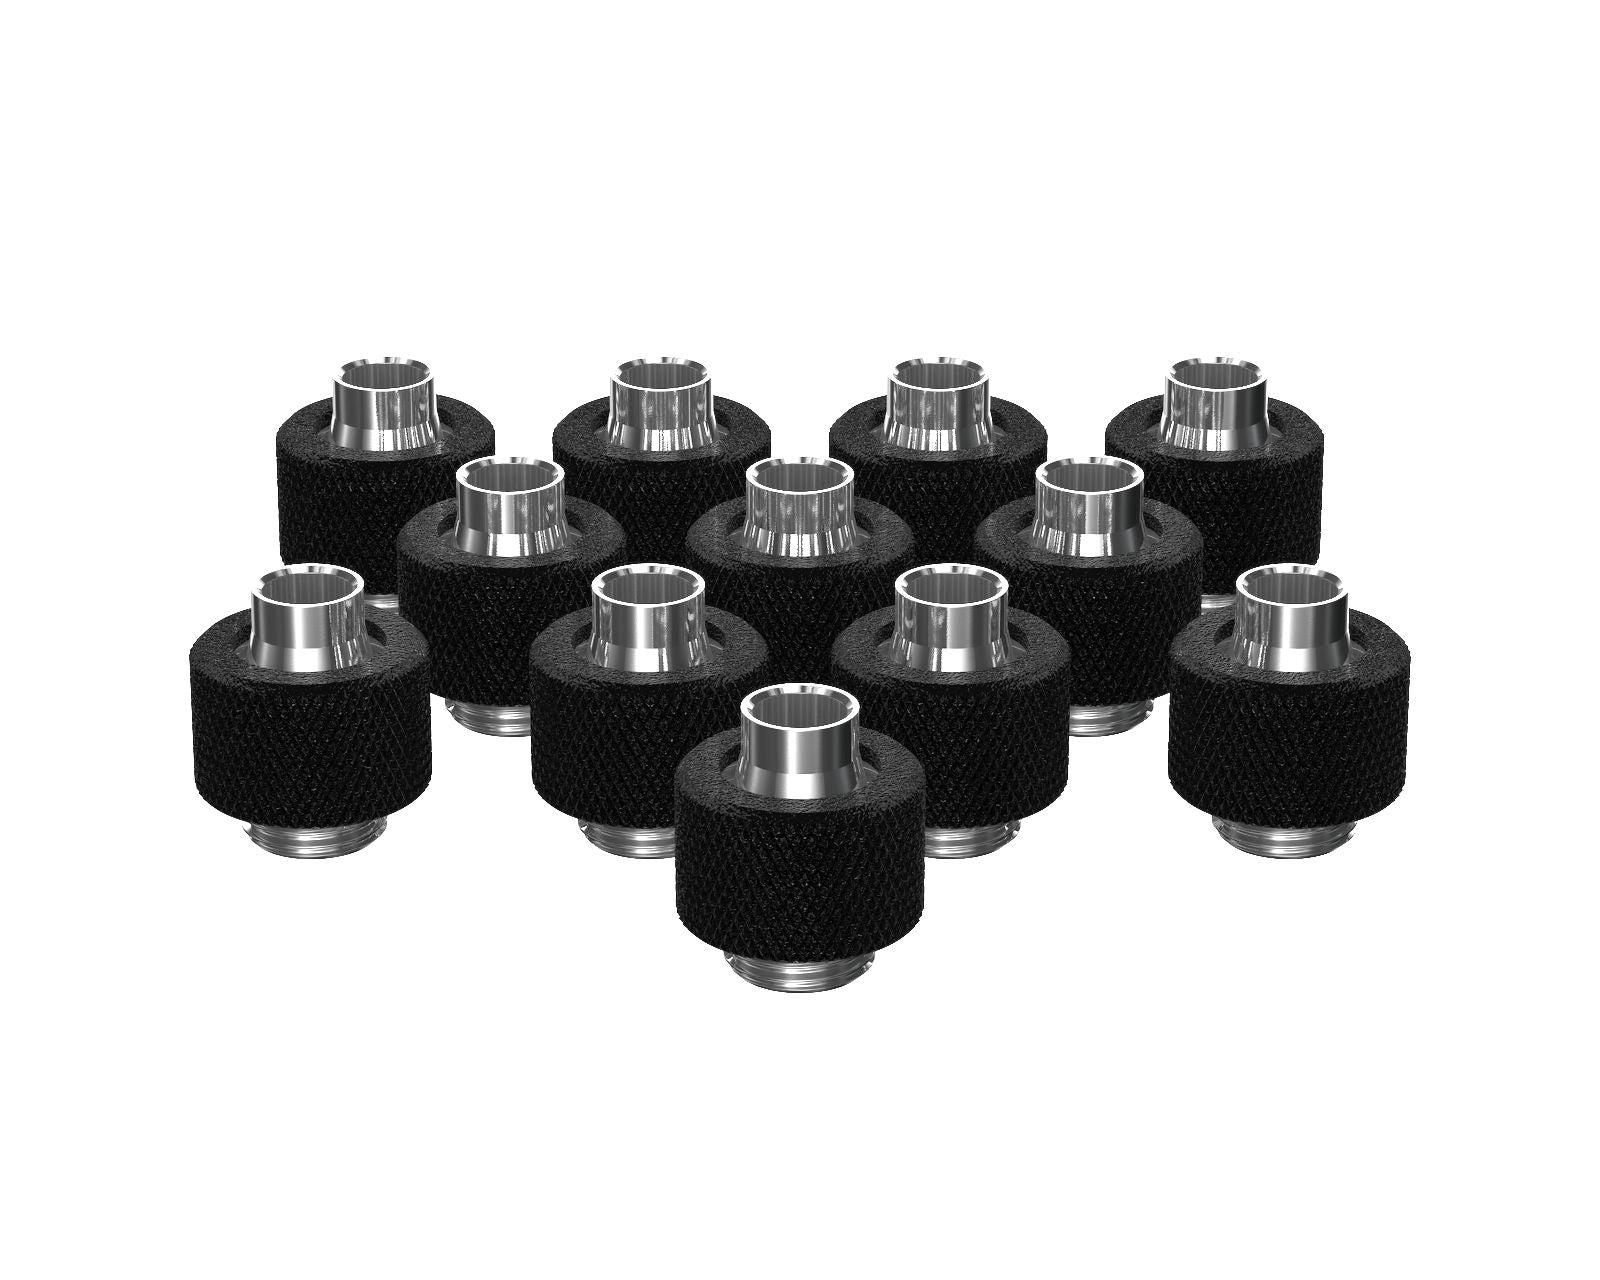 PrimoChill SecureFit SX - Premium Compression Fitting For 3/8in ID x 1/2in OD Flexible Tubing 12 Pack (F-SFSX12-12) - Available in 20+ Colors, Custom Watercooling Loop Ready - TX Matte Black